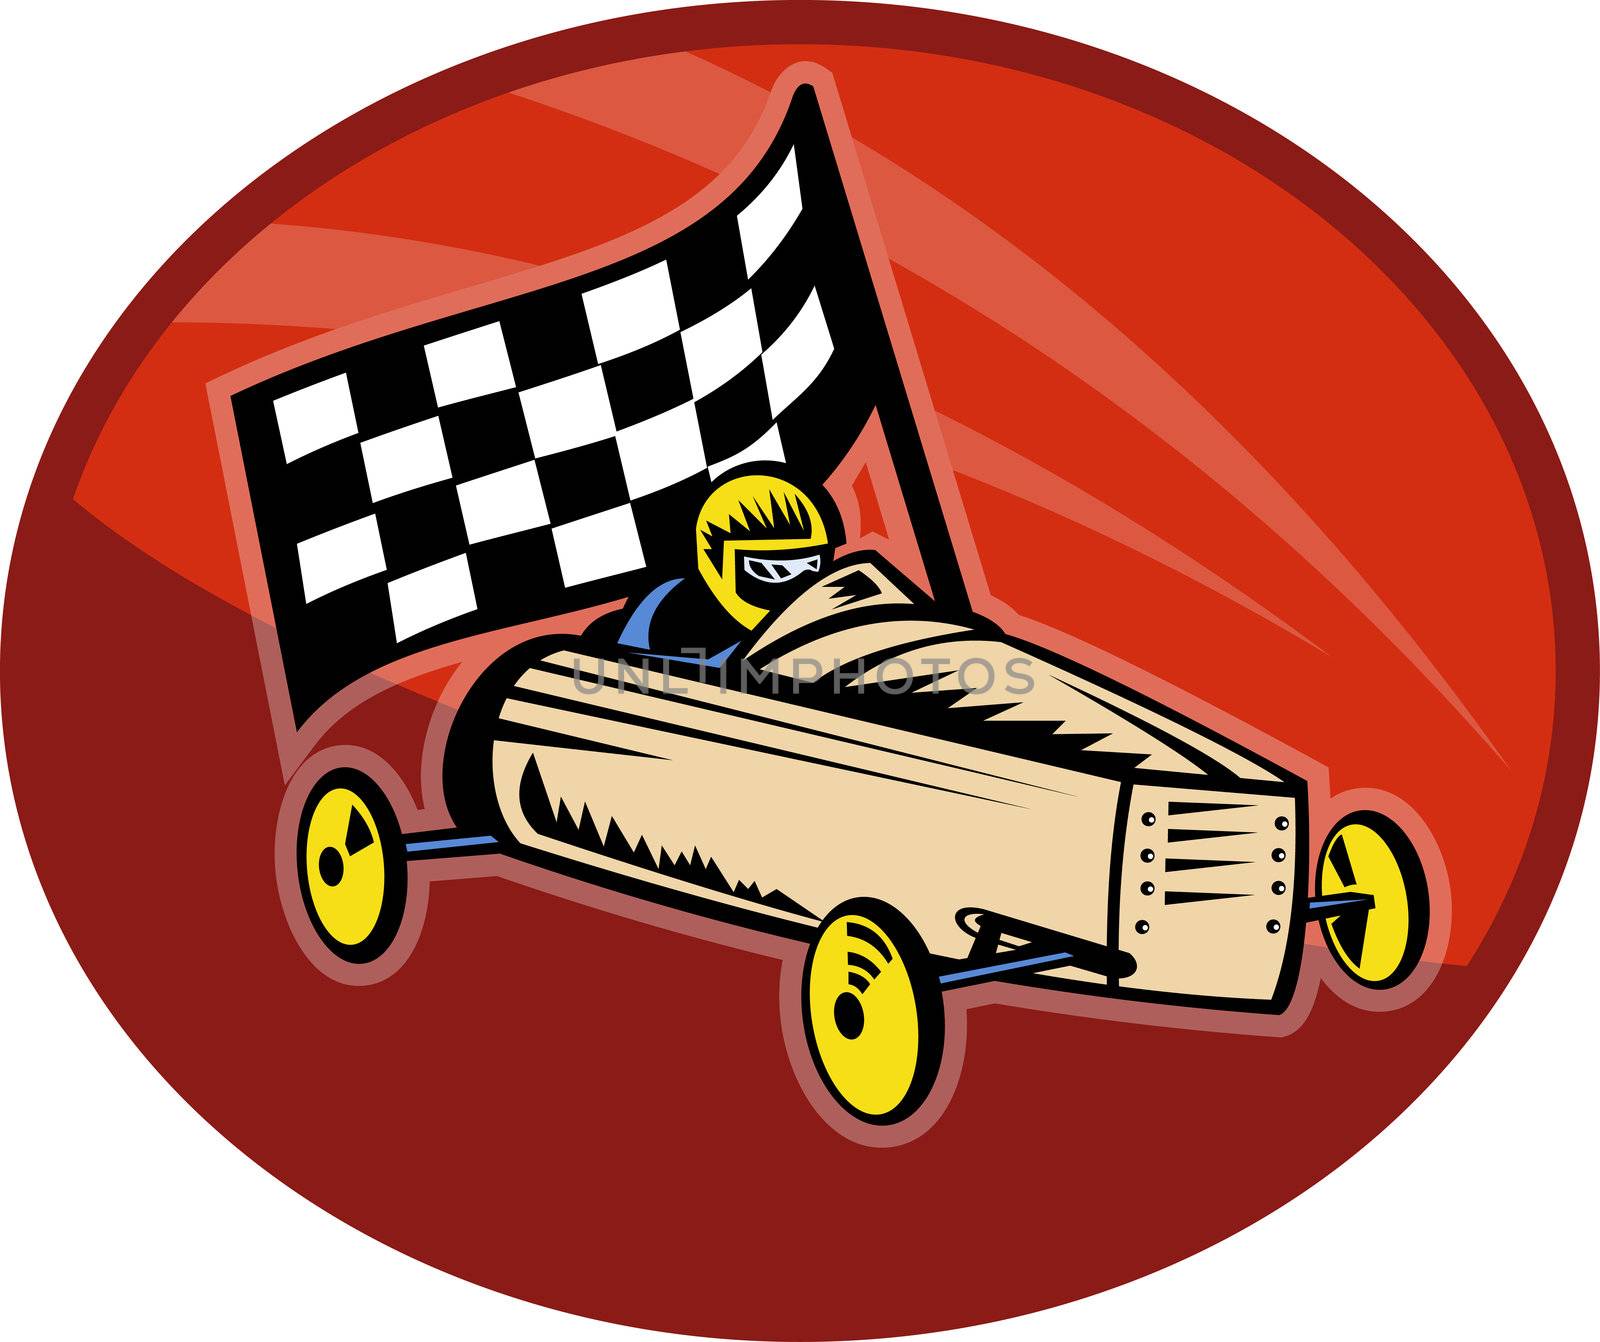 Soap box derby racing with race flag by patrimonio